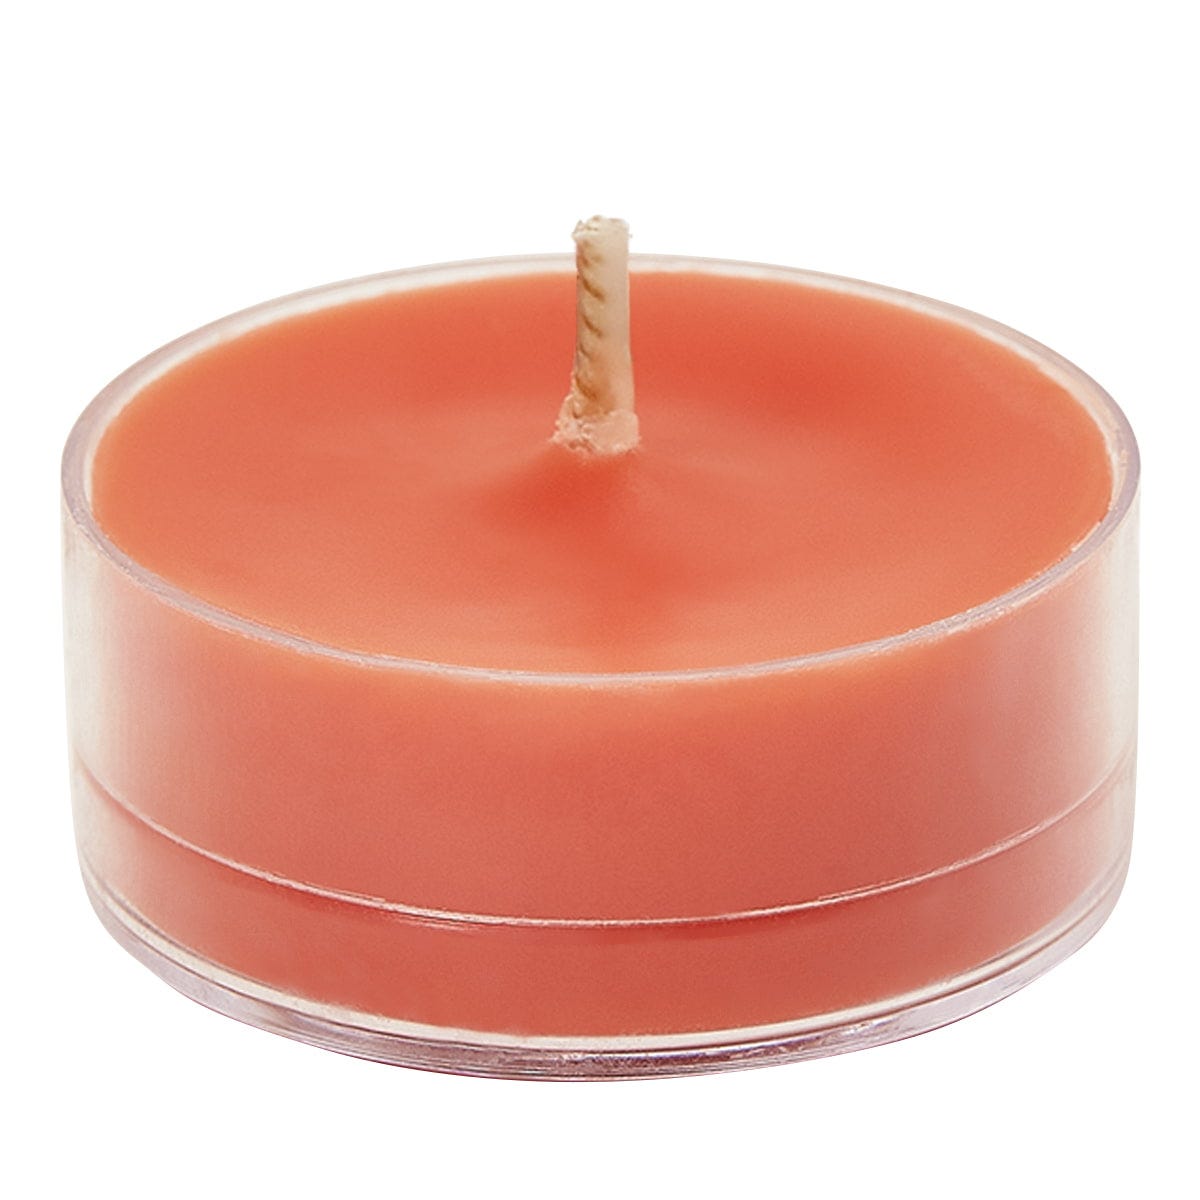 Grapefruit & Rosemary Universal Tealight® Candles - PartyLite US